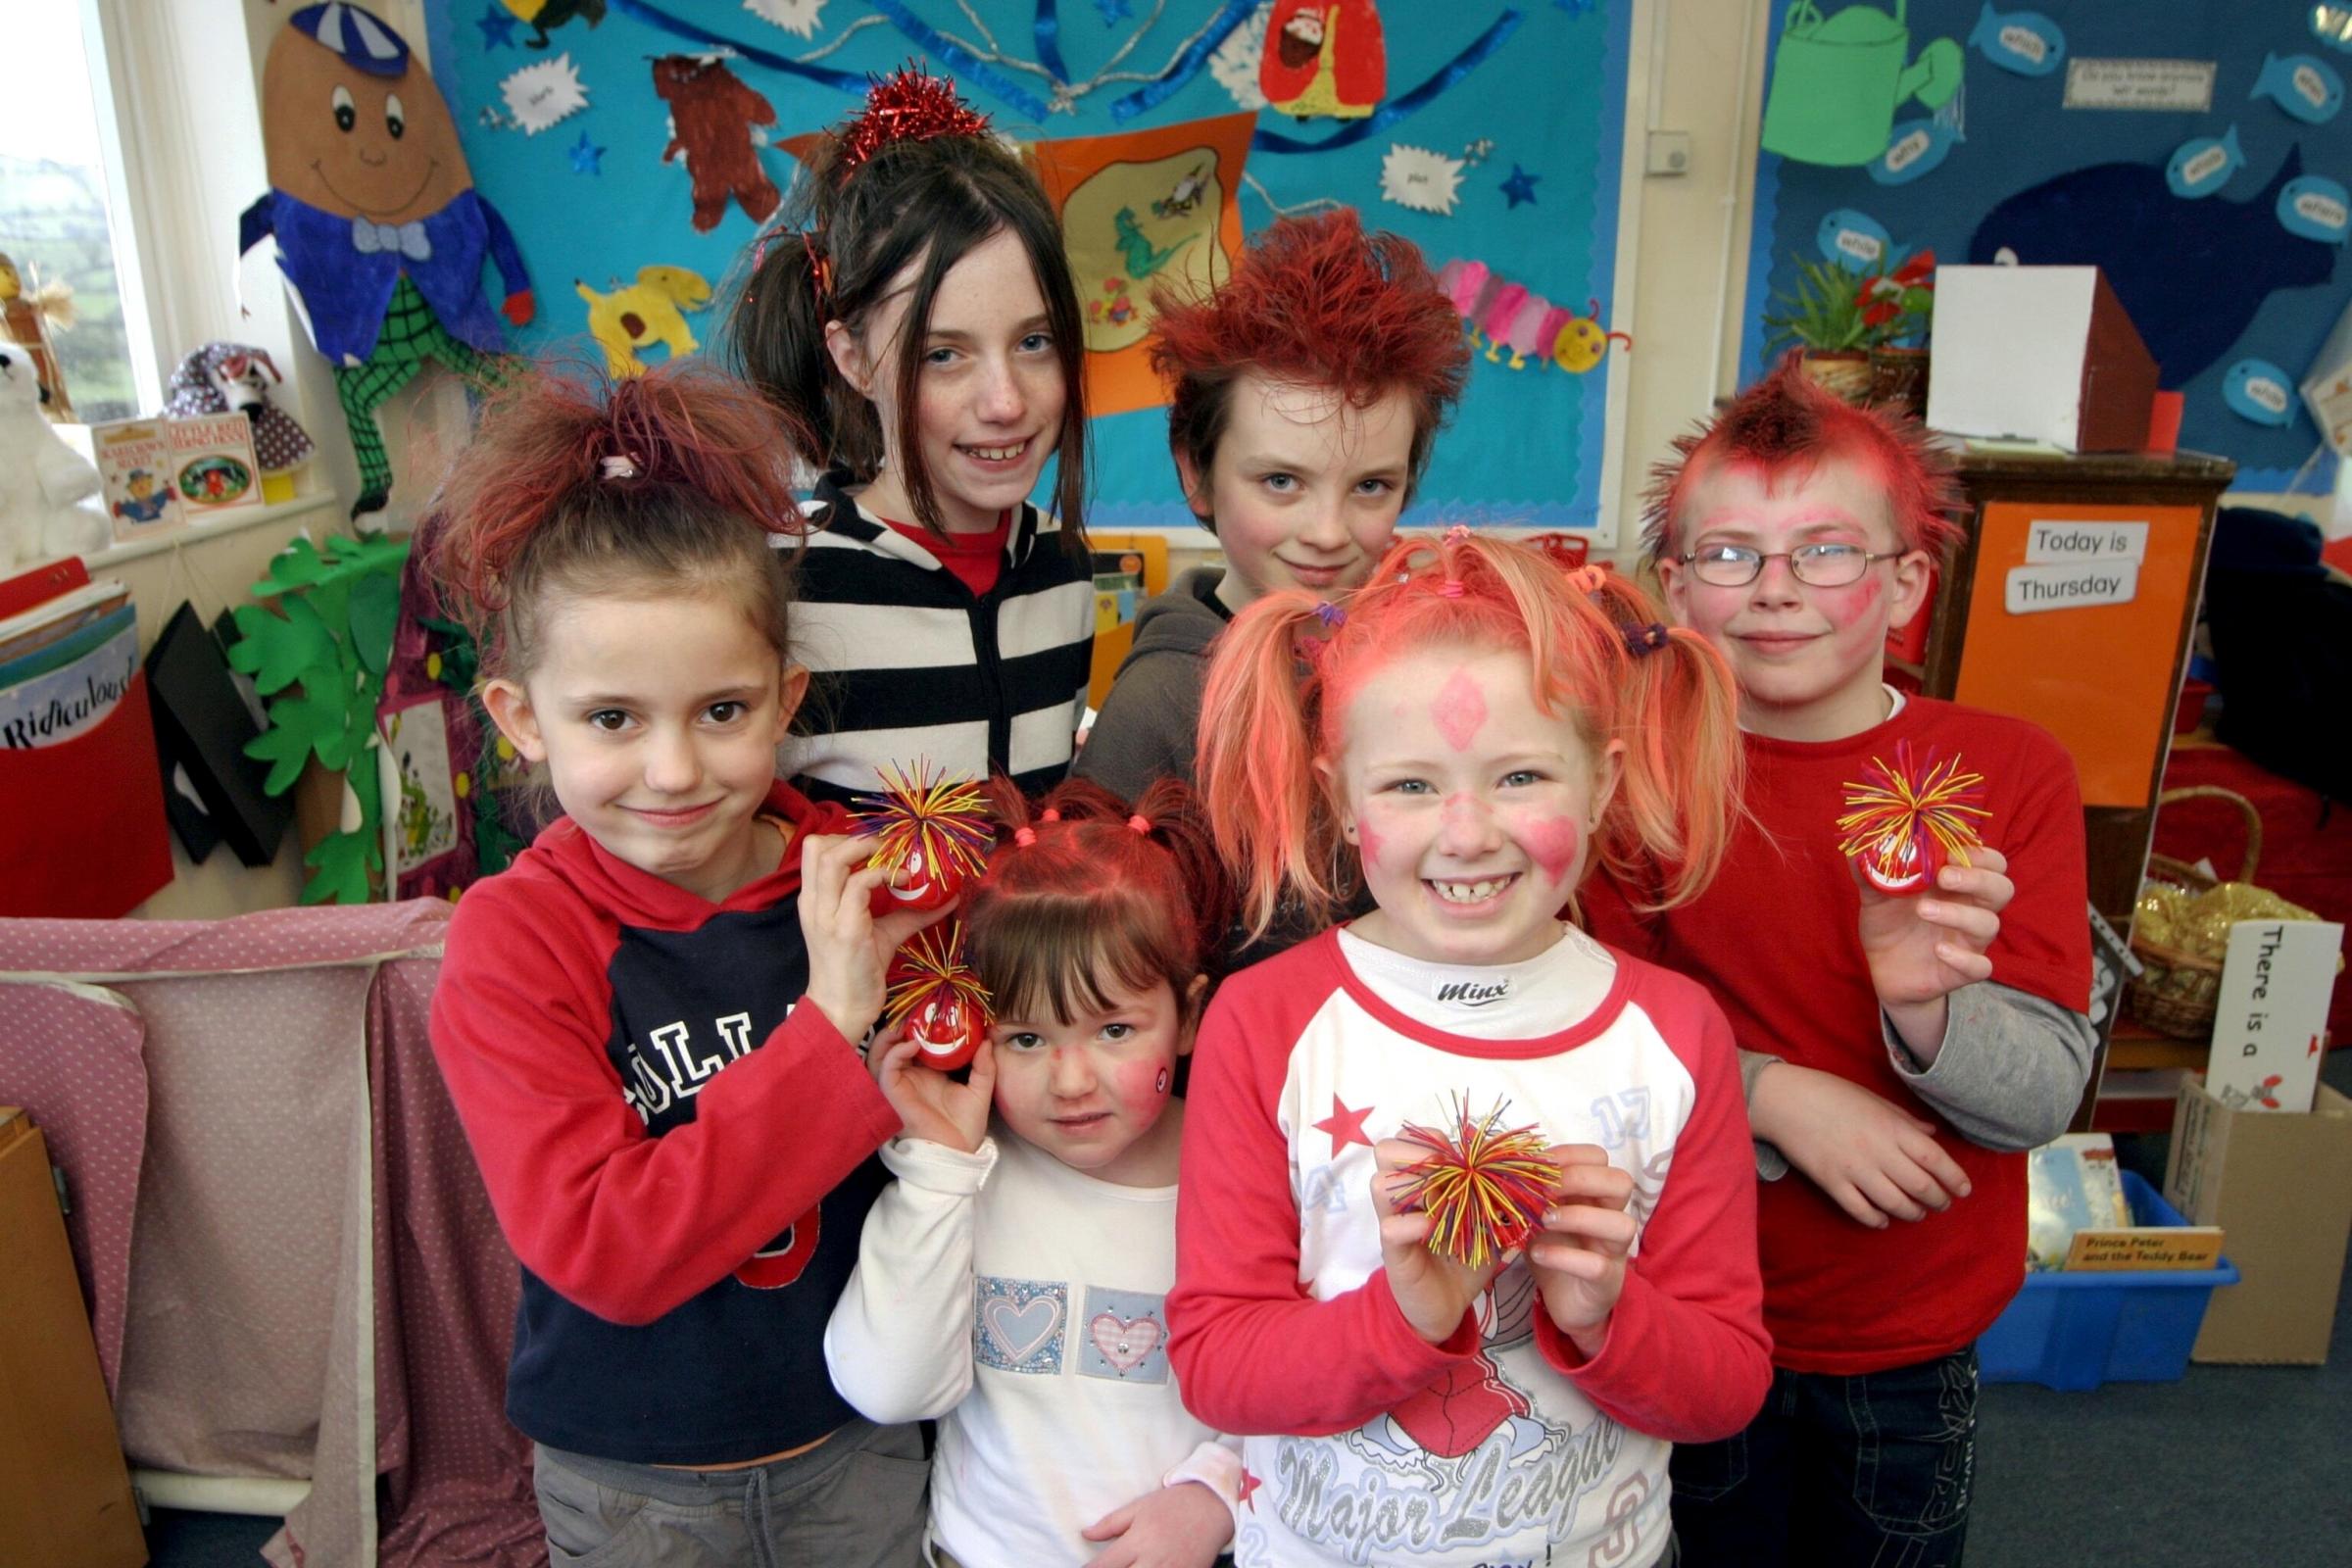 Comic Relief Red Nose Day 2005. The winners of the mad hair contest at Ysgol Bro Cynnaith, Llansilin, from left - Grace Fensome, Allegra Barker, Jessica Morris, Asher Hawkins - Brown, Katie Williams, Thomas Williams. HD110305.